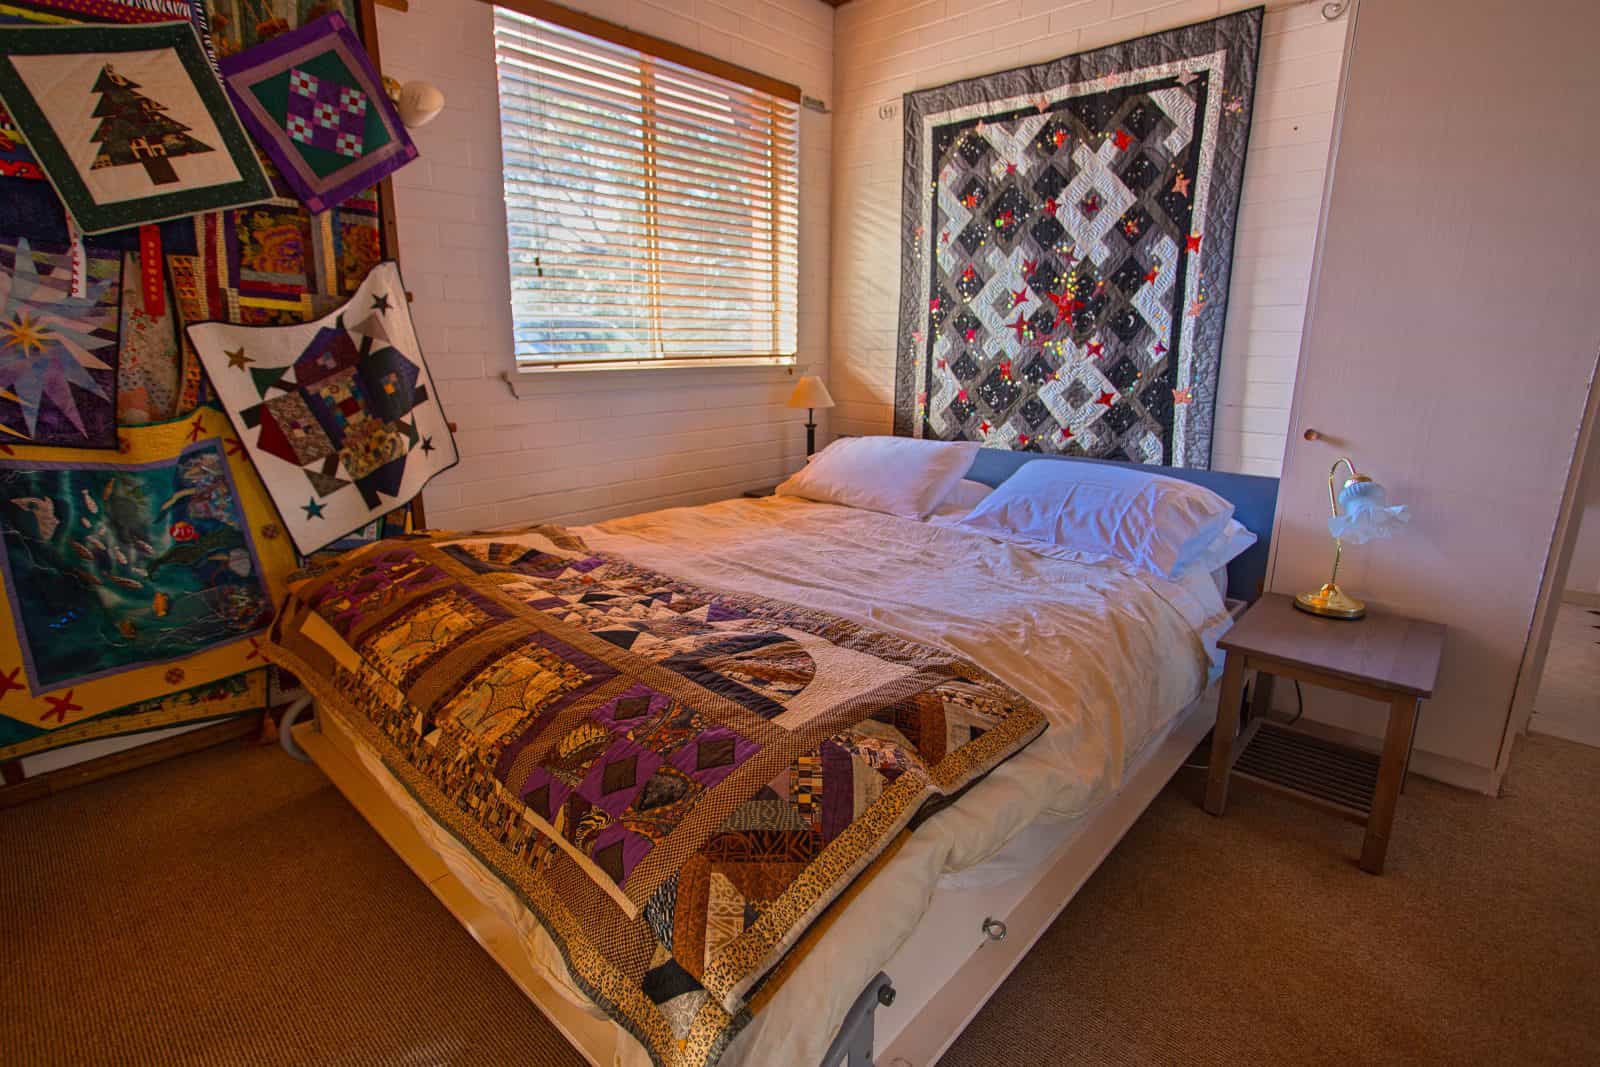 queen sized double bed with quilt bedspread